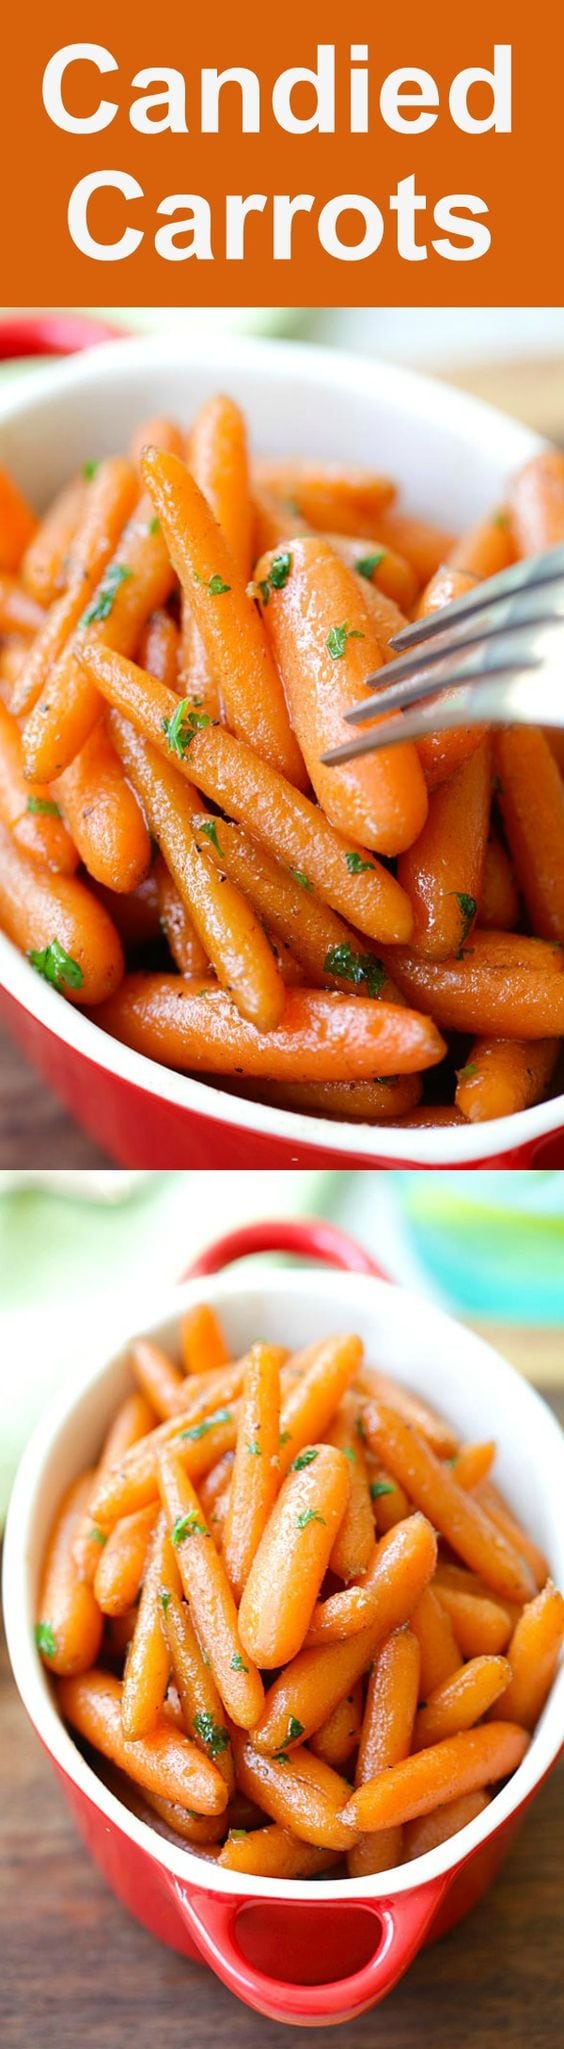 Candied Carrots - tender and delicious candied carrots that takes only 10 mins on skillet. Easy candied carrots recipe that is great anytime of the year | rasamalaysia.com